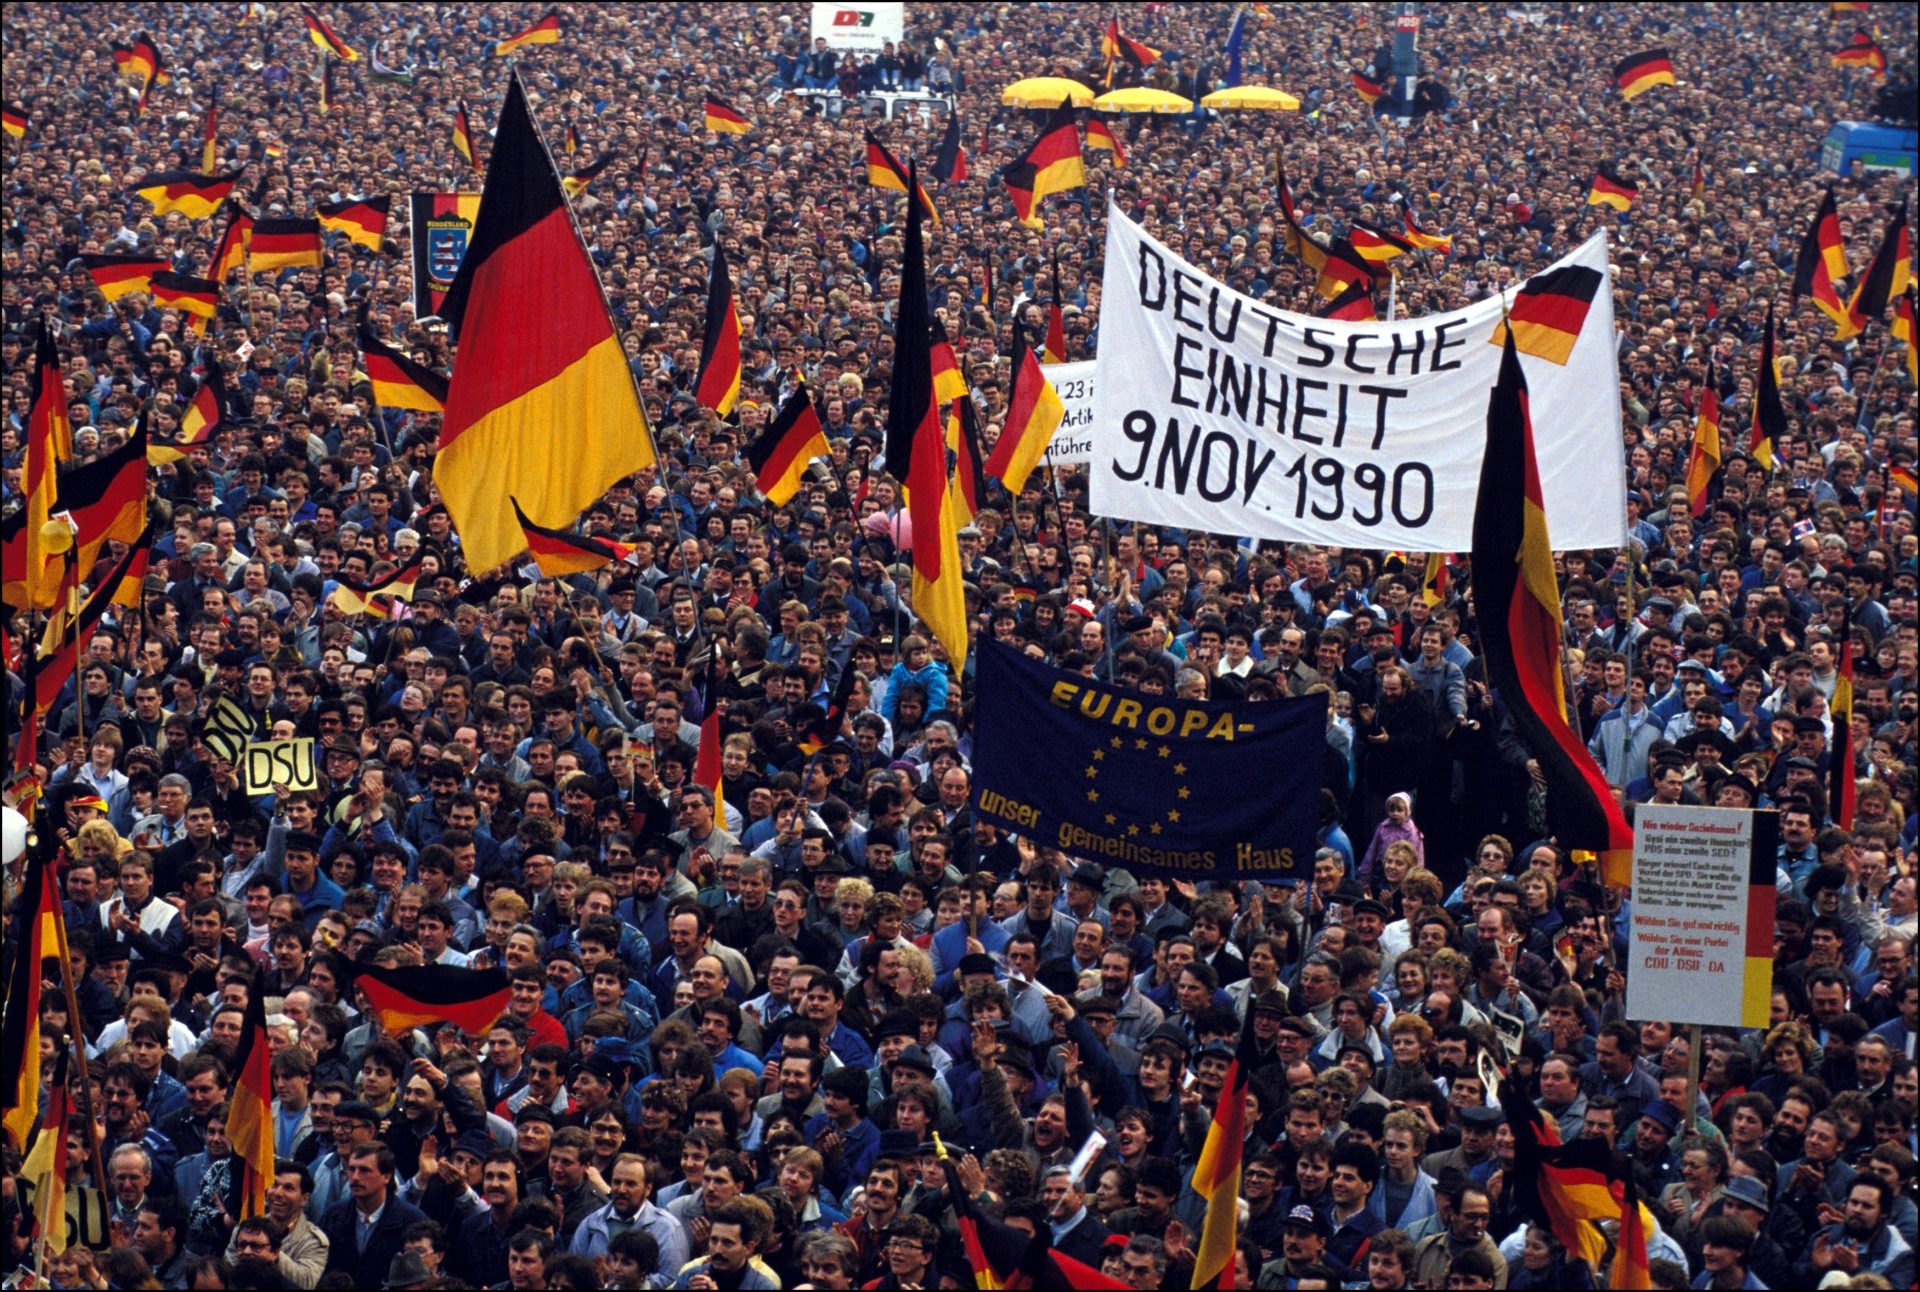 Germany was reunited as a country in 1990. Photograph: Patrick Piel/Getty Images.